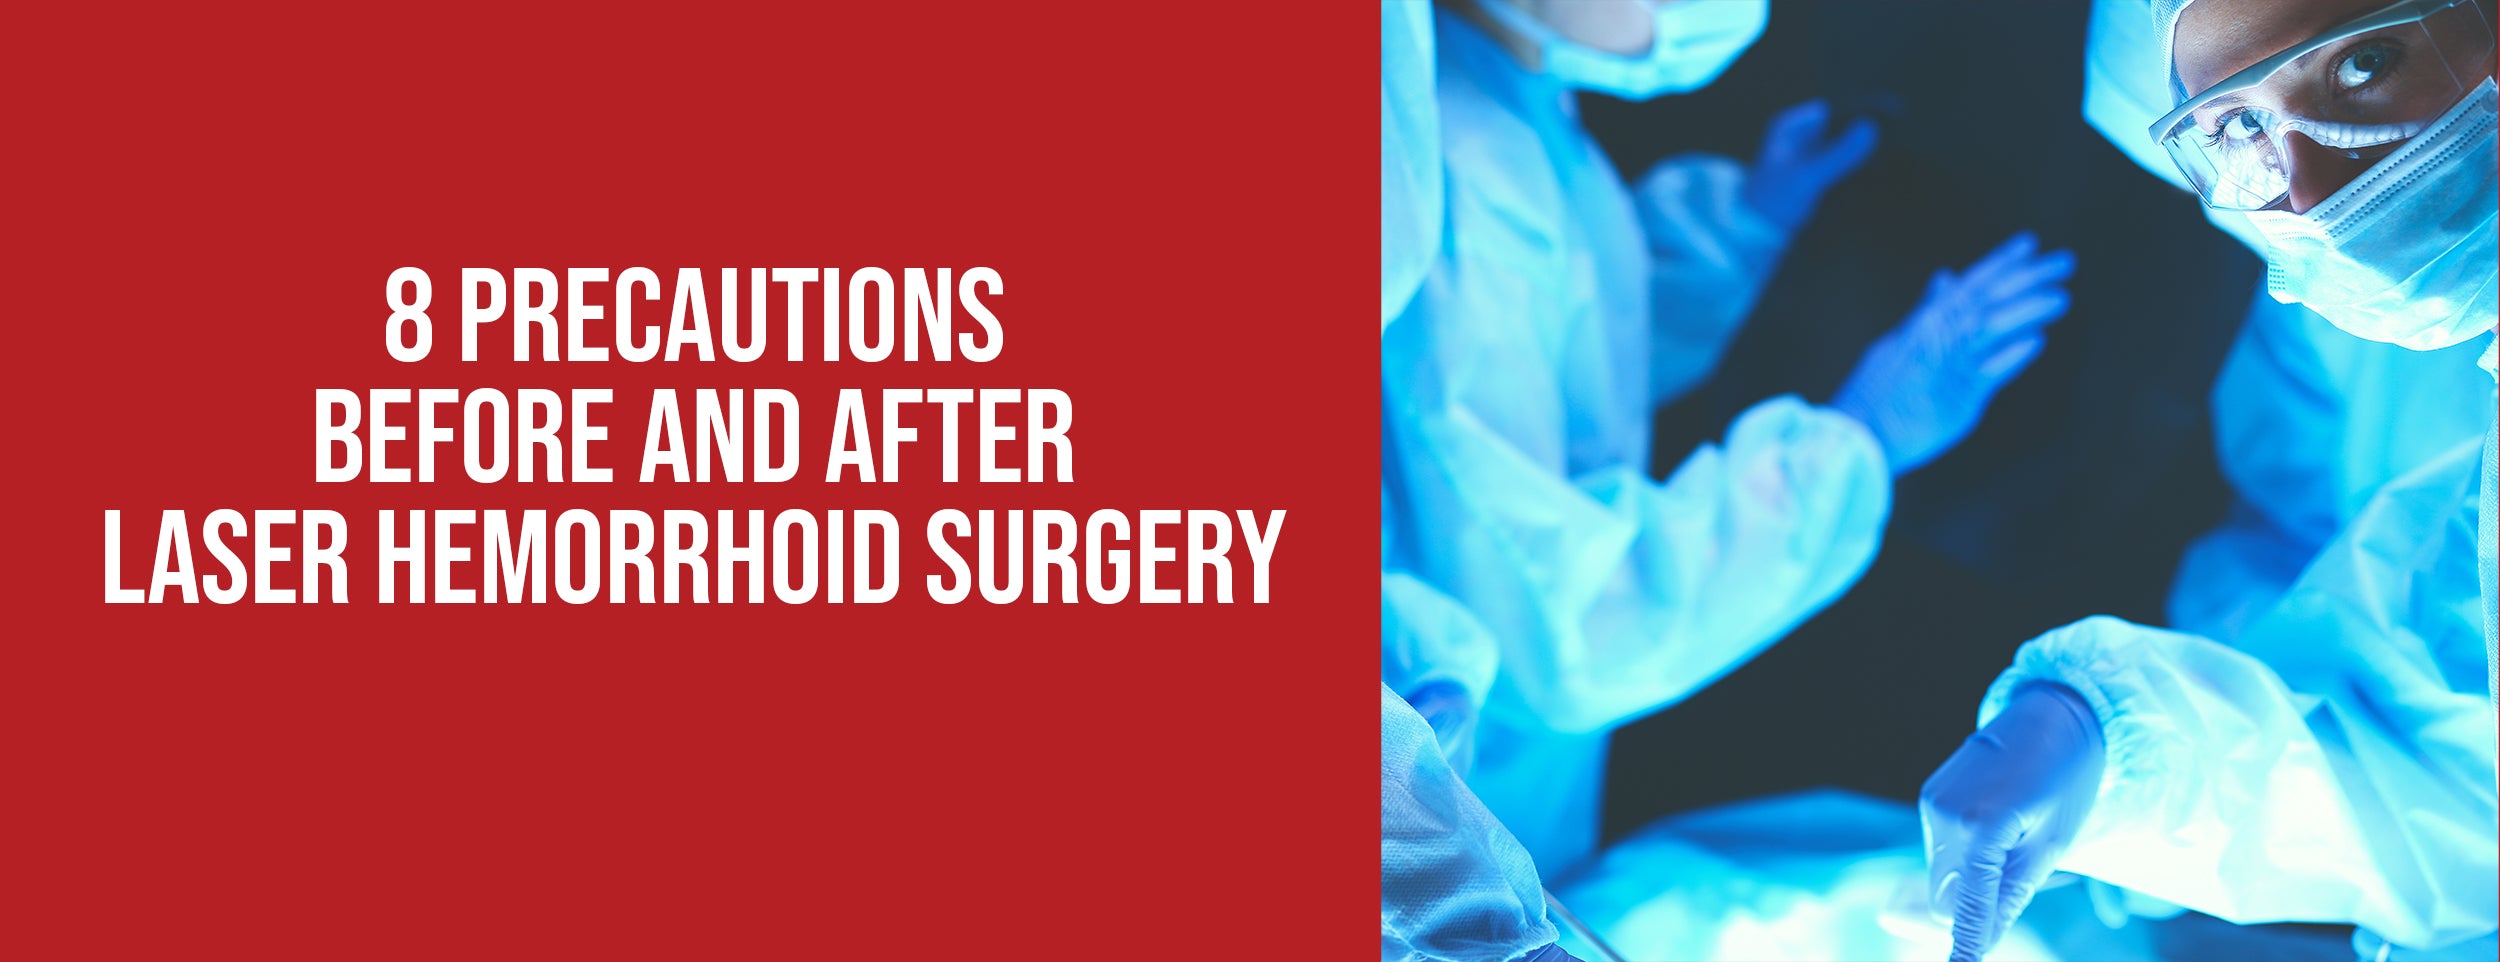 The 8 most important precautions to take before and after laser hemorrhoids surgery